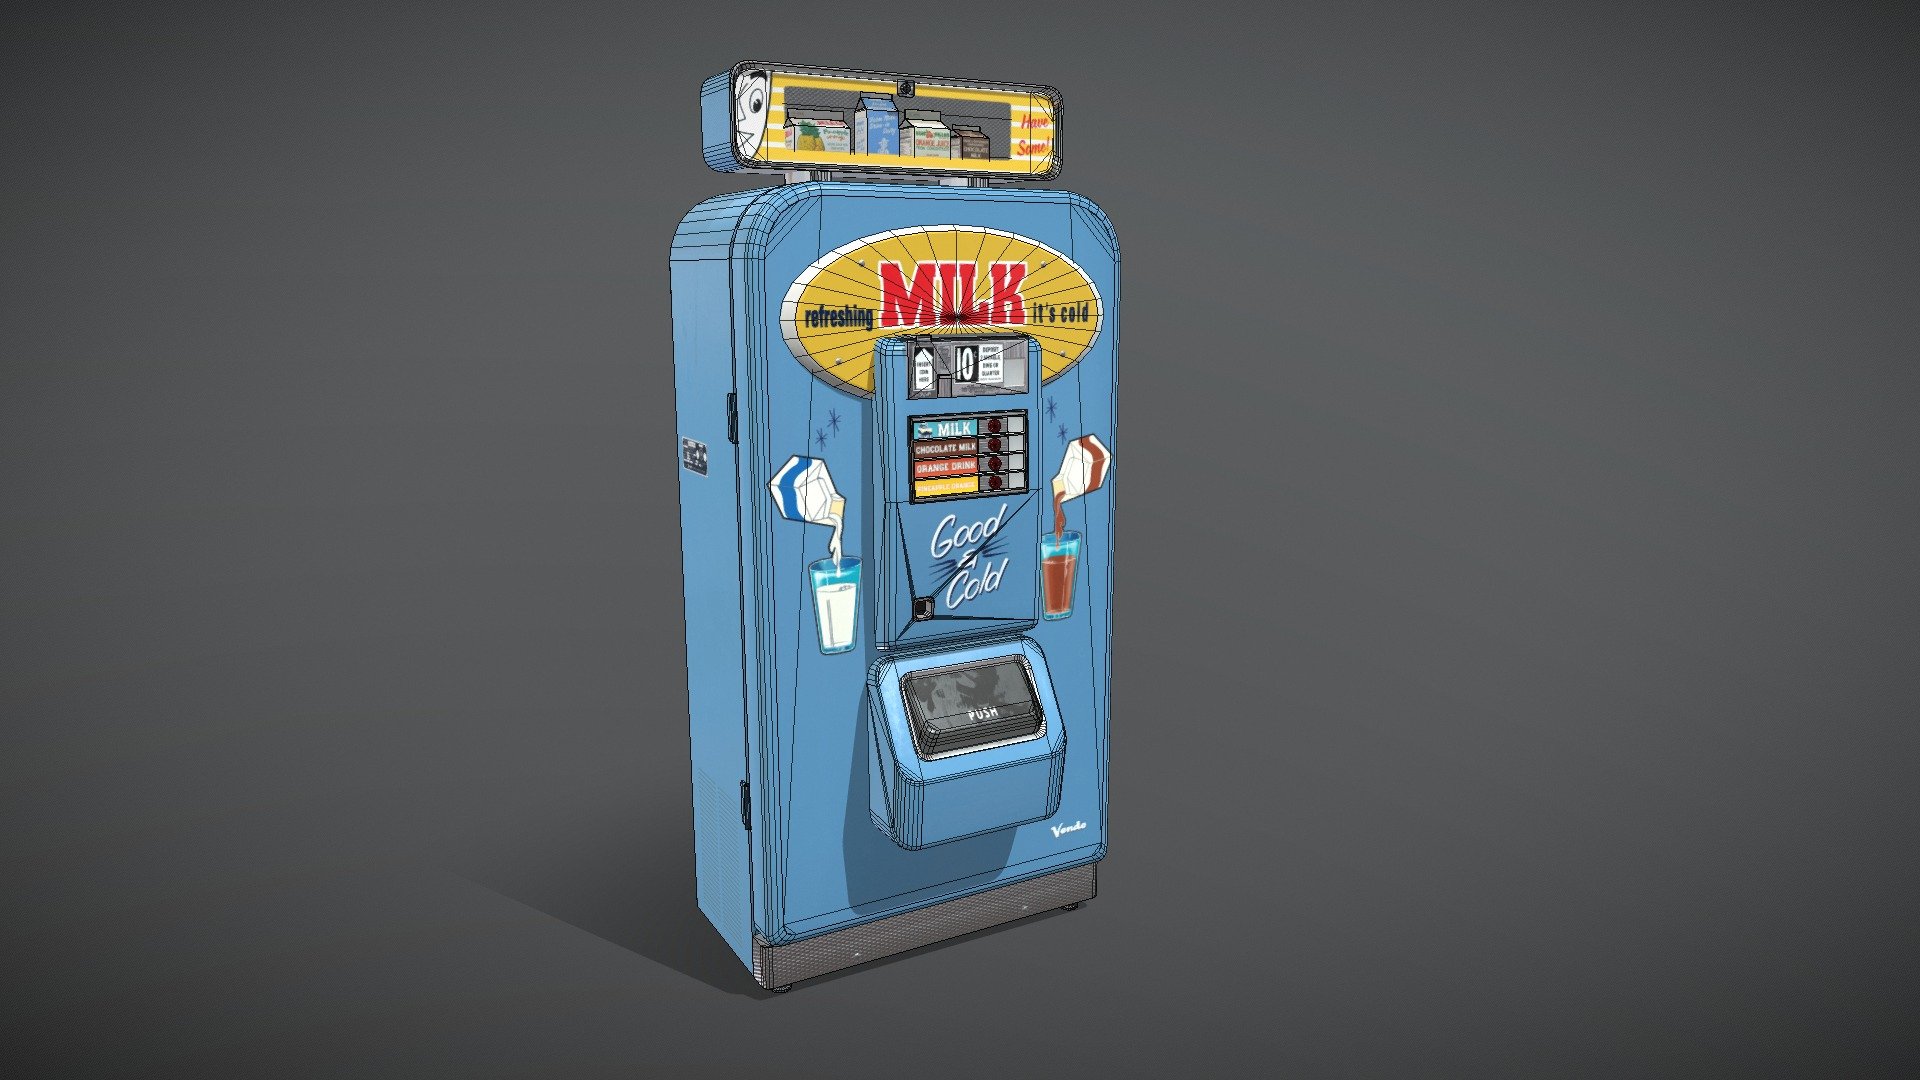 I love vintage stuff, so I decided to make this Vendo machine from the 50s. I tried to give it a clean but used aspect. 
Modeled in 3ds Max, textured in Substance Painter and rendered in Marmoset Toolbag 3. All decals were done in Photoshop 3d model